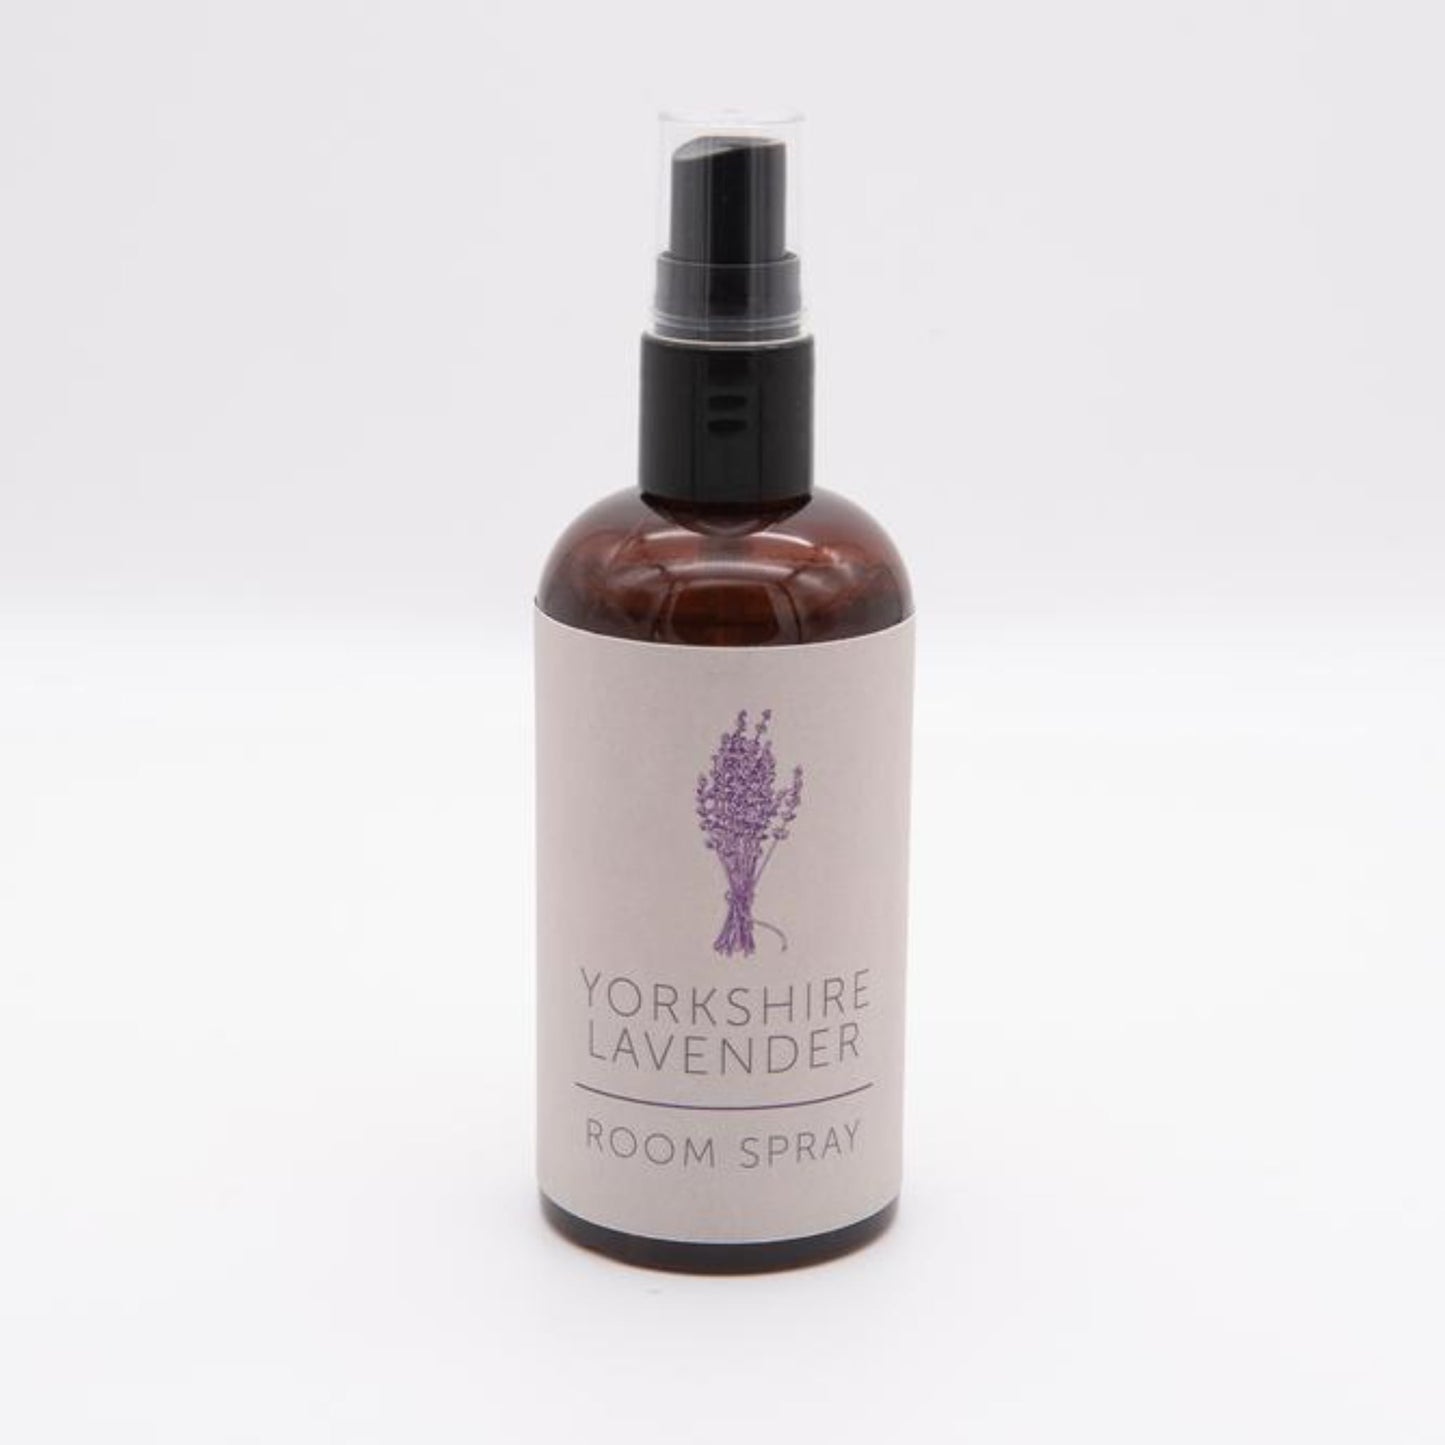 Yorkshire Lavender Room Spray - The Great Yorkshire Shop